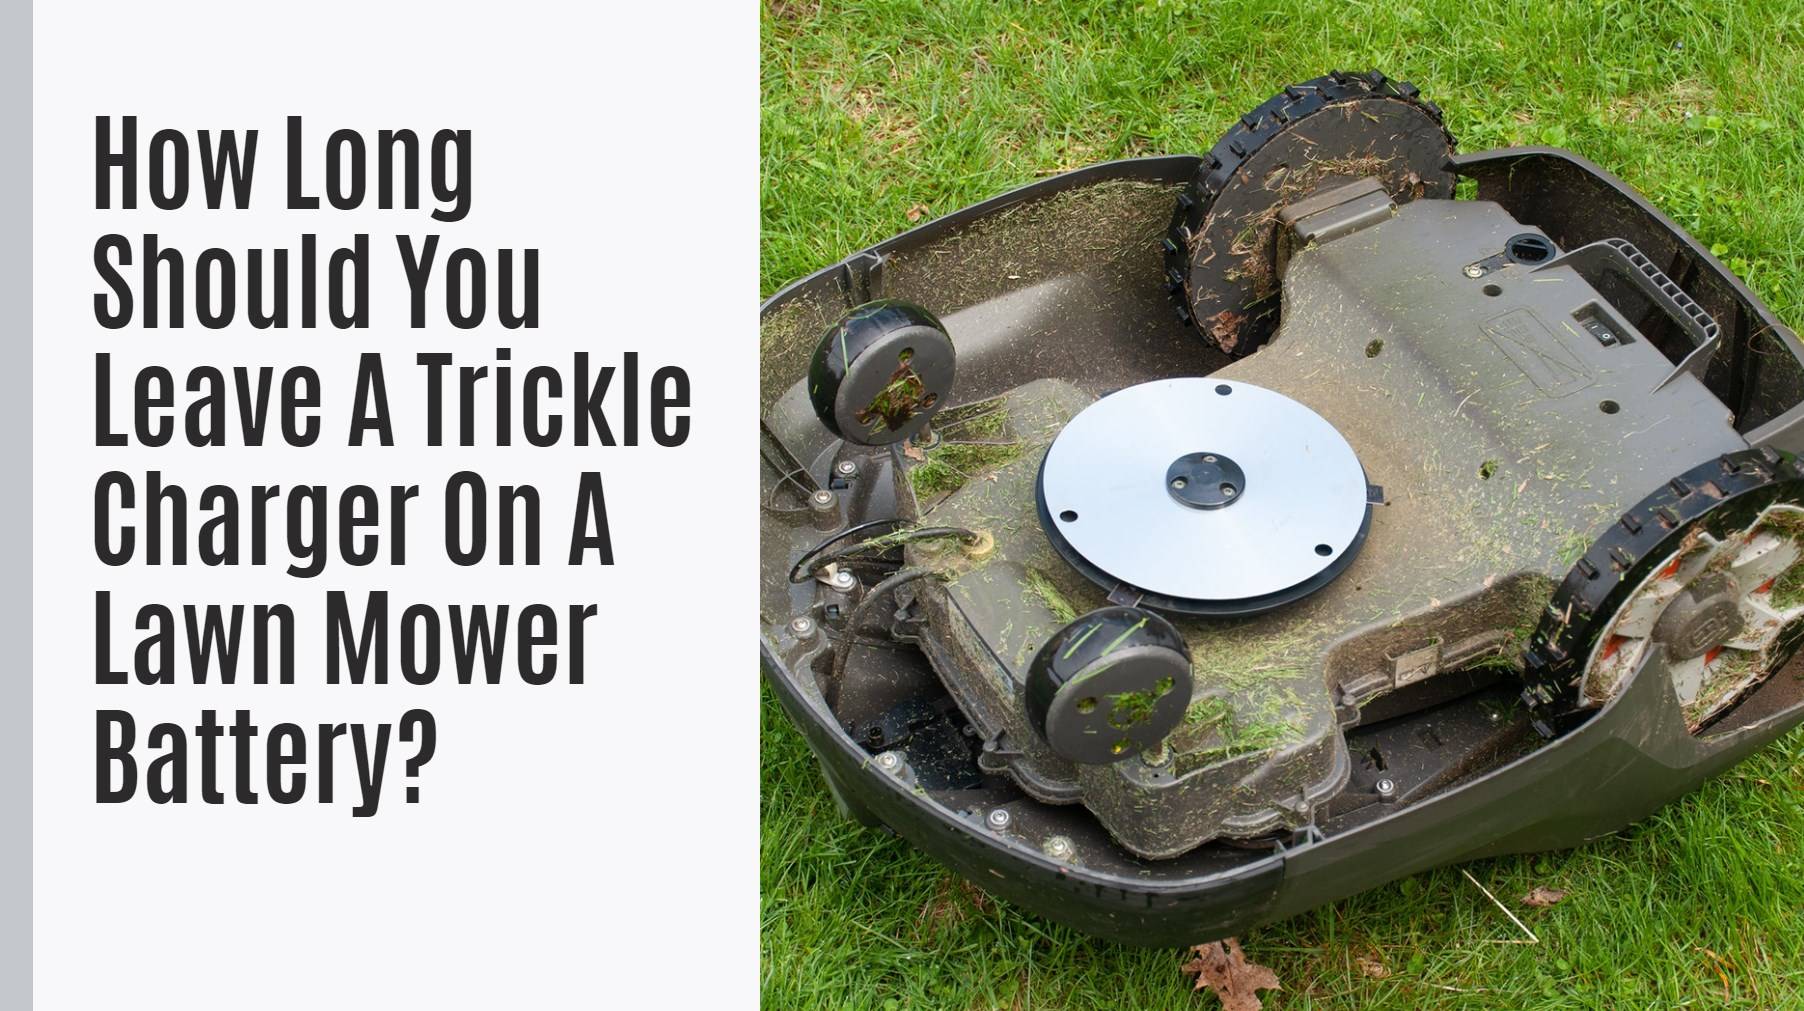 How Long Should You Leave A Trickle Charger On A Lawn Mower Battery?